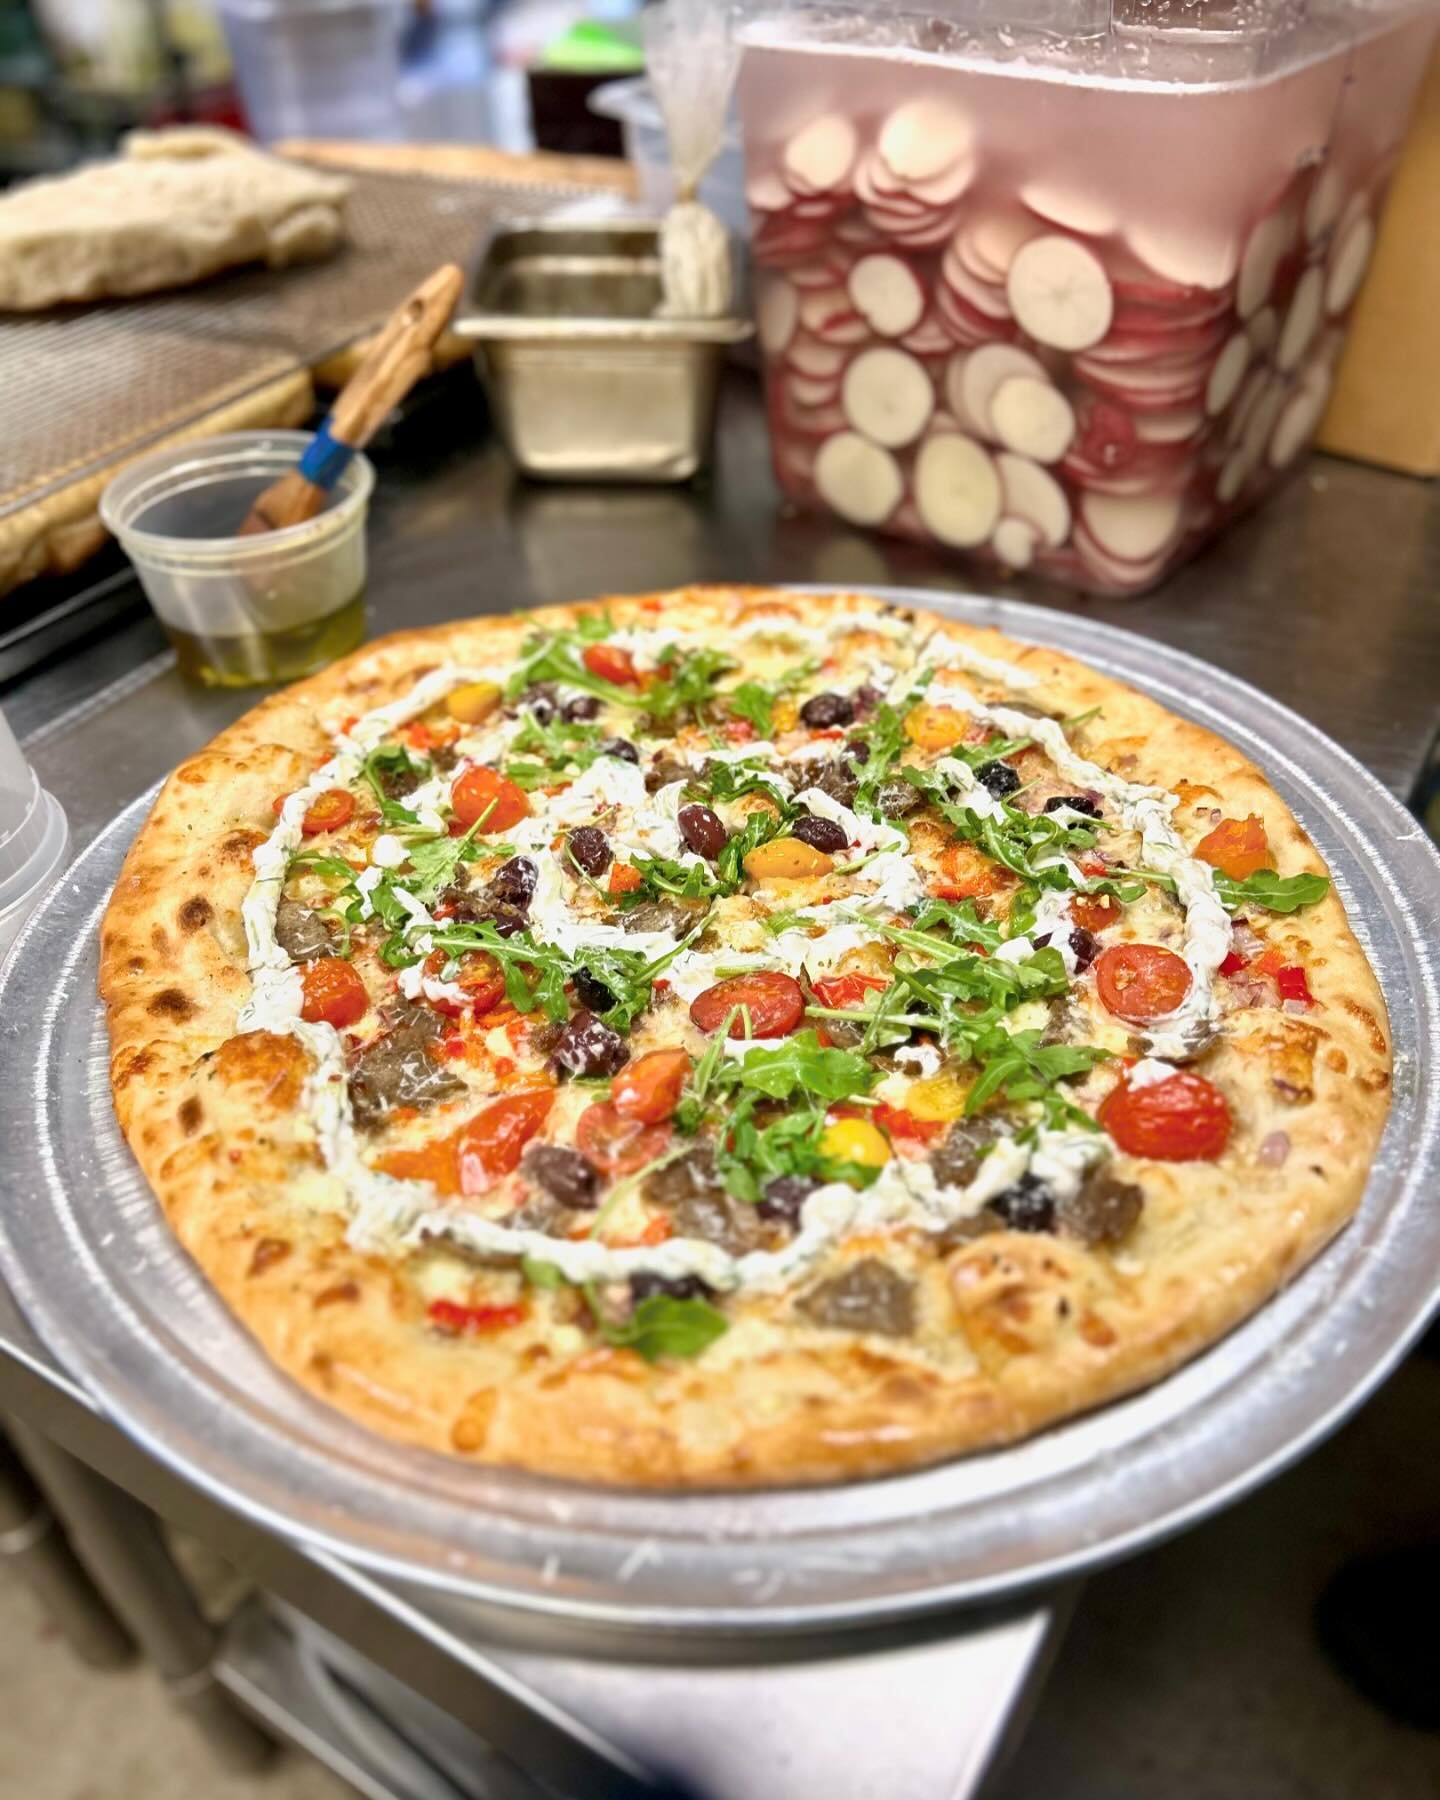 Friday night pie?!

We&rsquo;ve got you covered! Order online or come dine on our epic patio in this glorious weather!

We&rsquo;ll be here til 8 🍕🤙🏼

#pinkyringpizza #madisontn